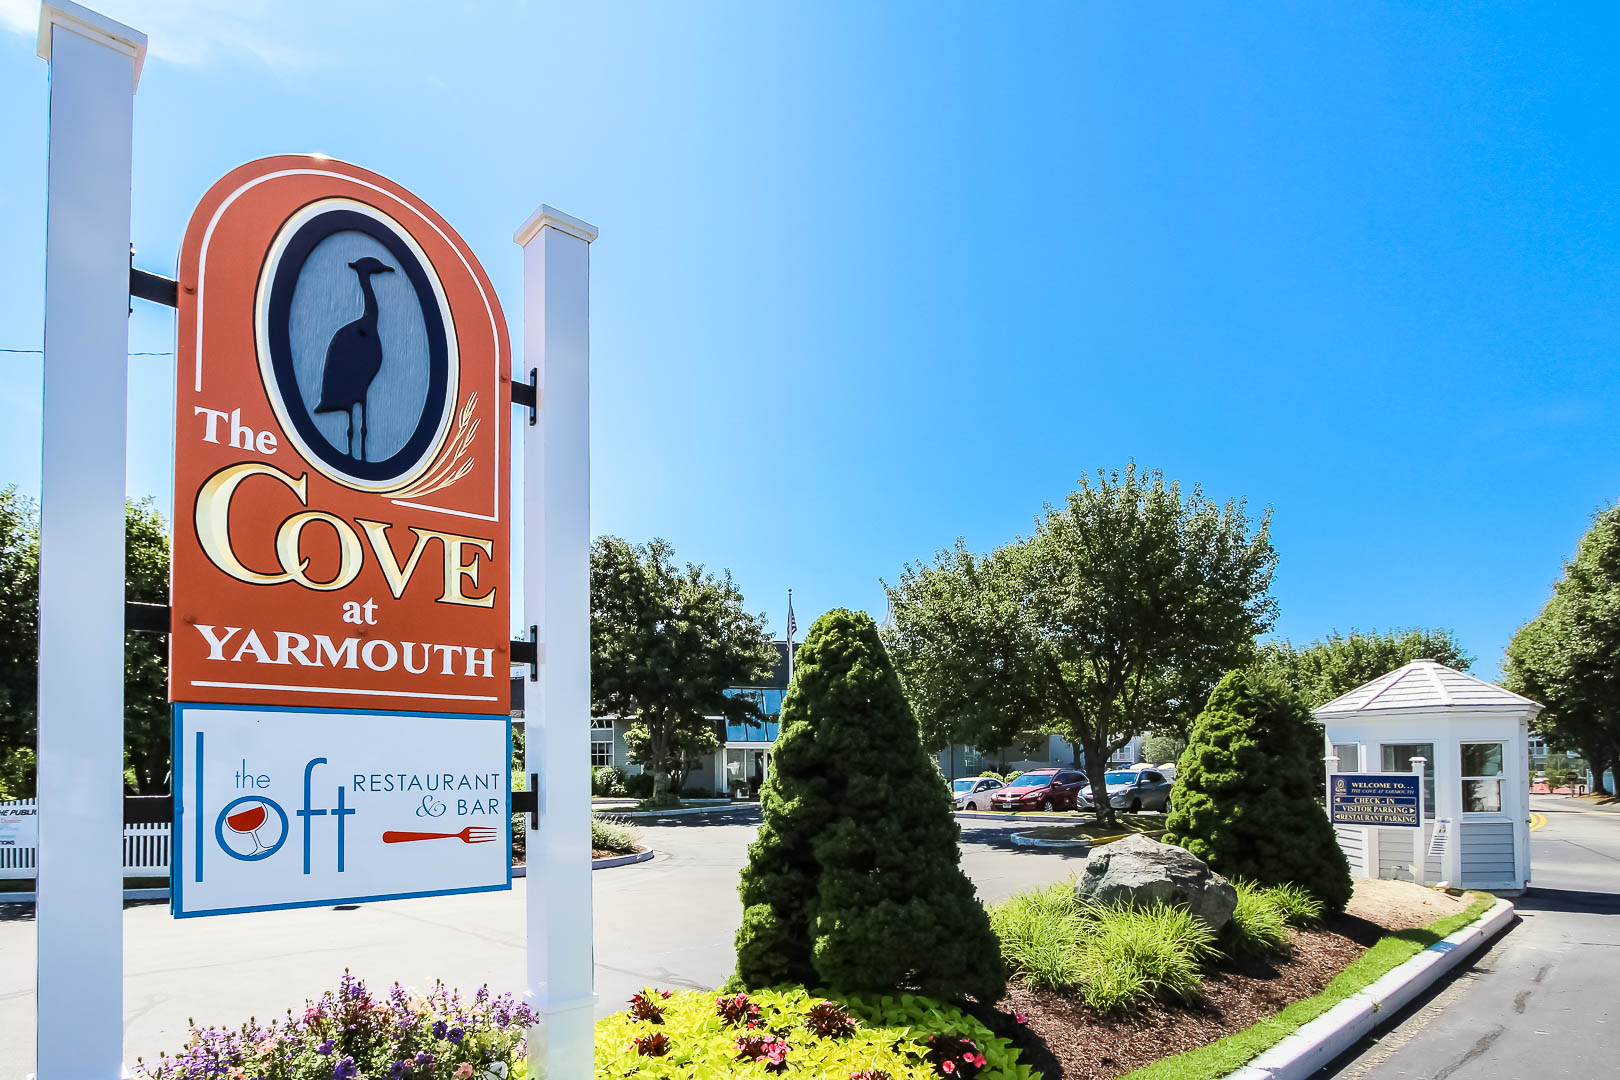 Beautiful skies and resort entrance at VRI's The Cove at Yarmouth in Massachusetts.